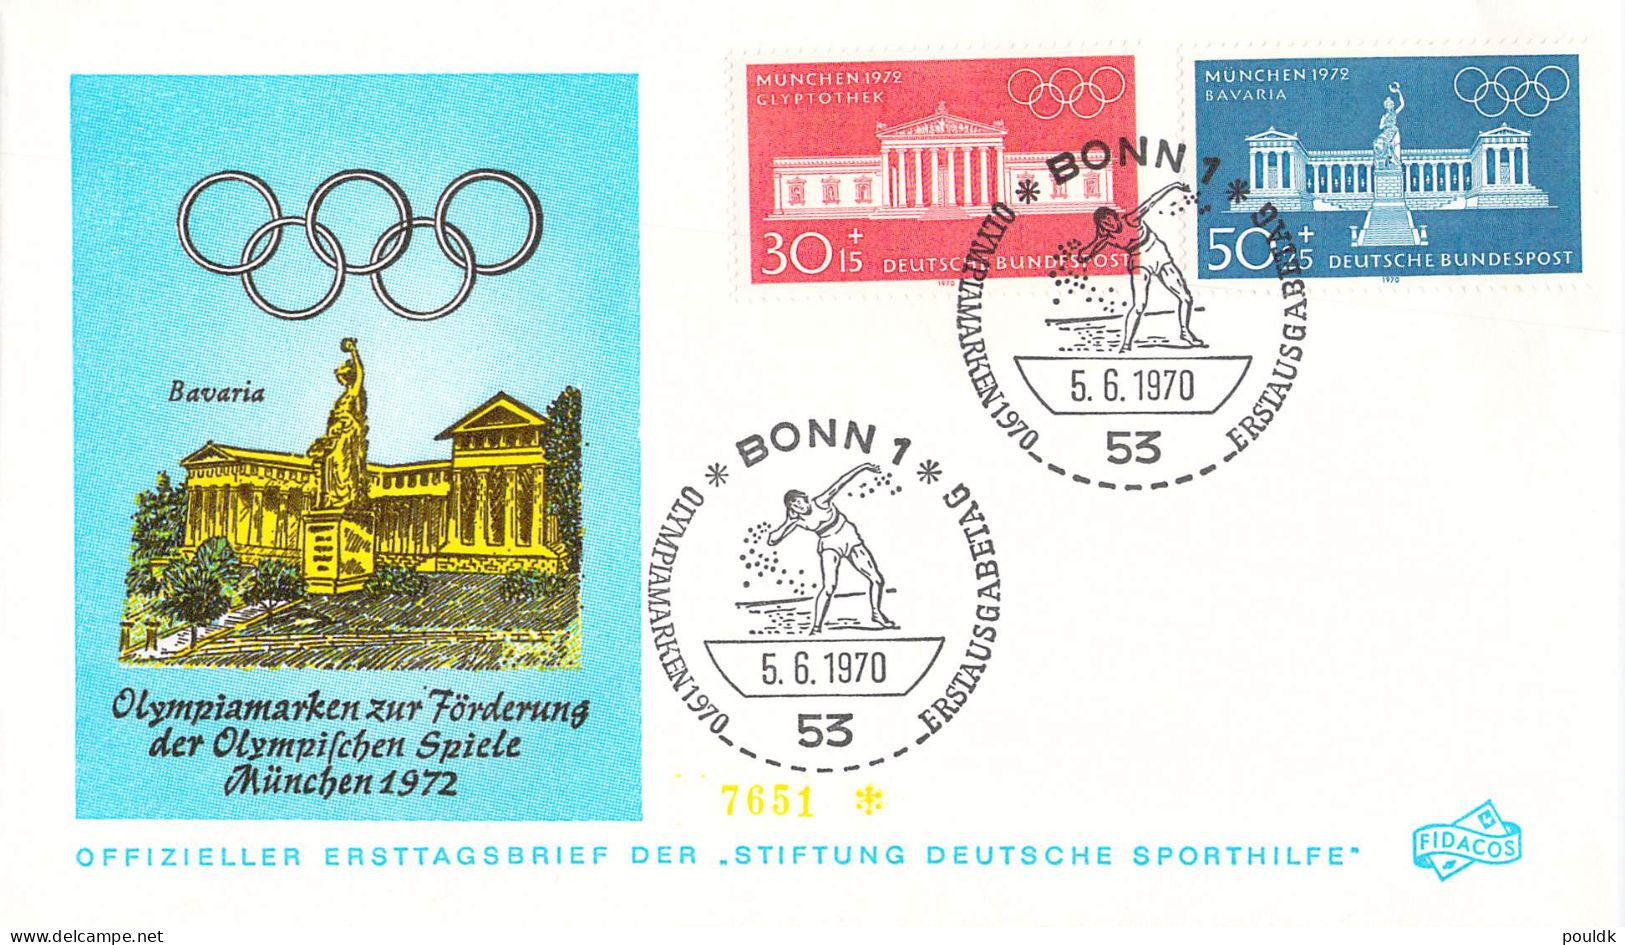 Olympic Games 1972 - 24 covers. Postal Weight 0,120 kg. Please read Sales Conditions under Image of Lot (009-112)